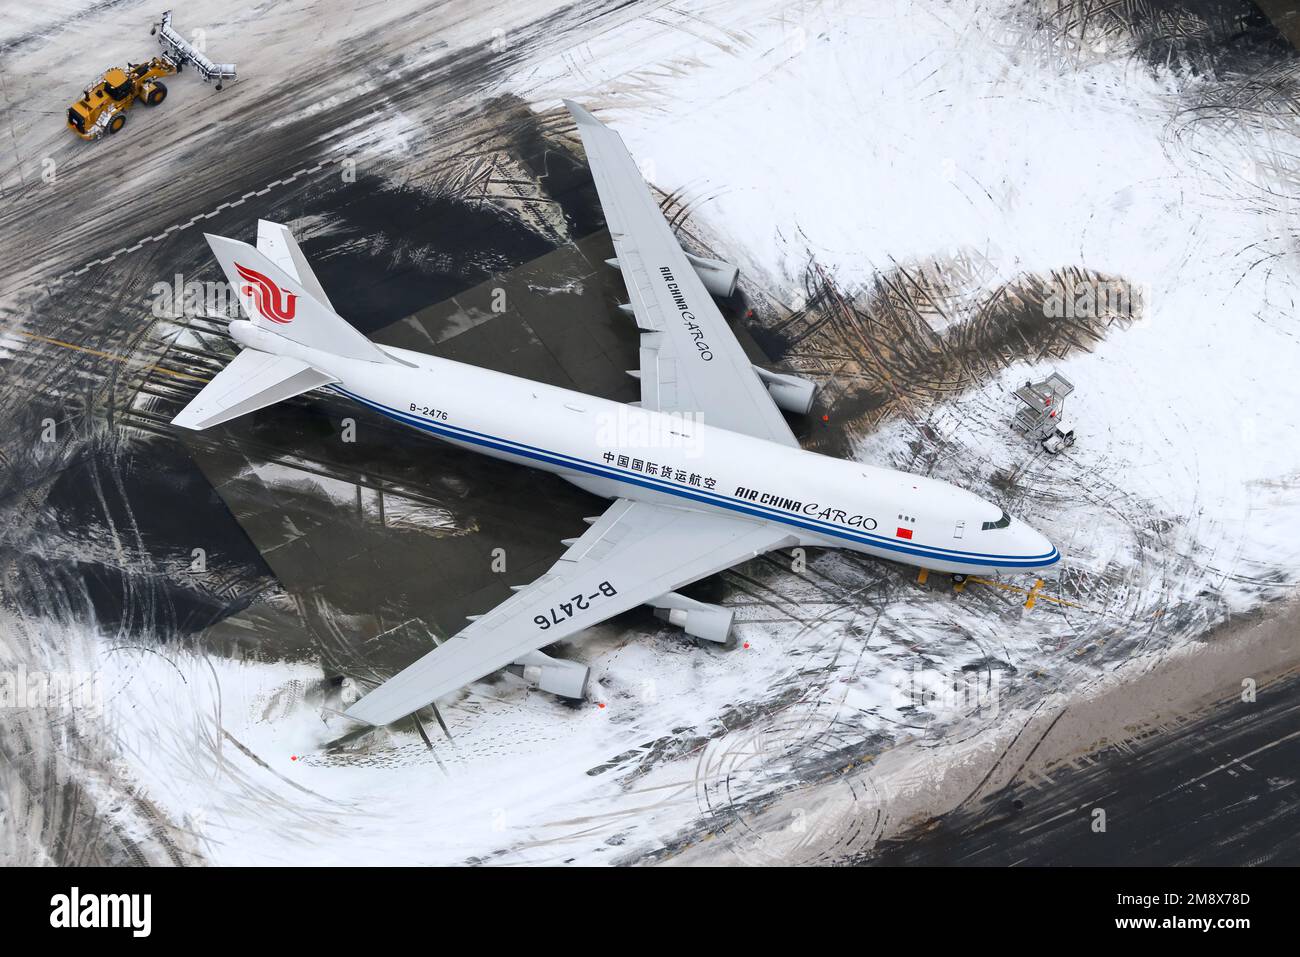 Air China cargo Boeing 747-400 aircraft parked at Anchorage Airport after snow storm. Airplane 747-400F of Air China Cargo after with snow around. Stock Photo